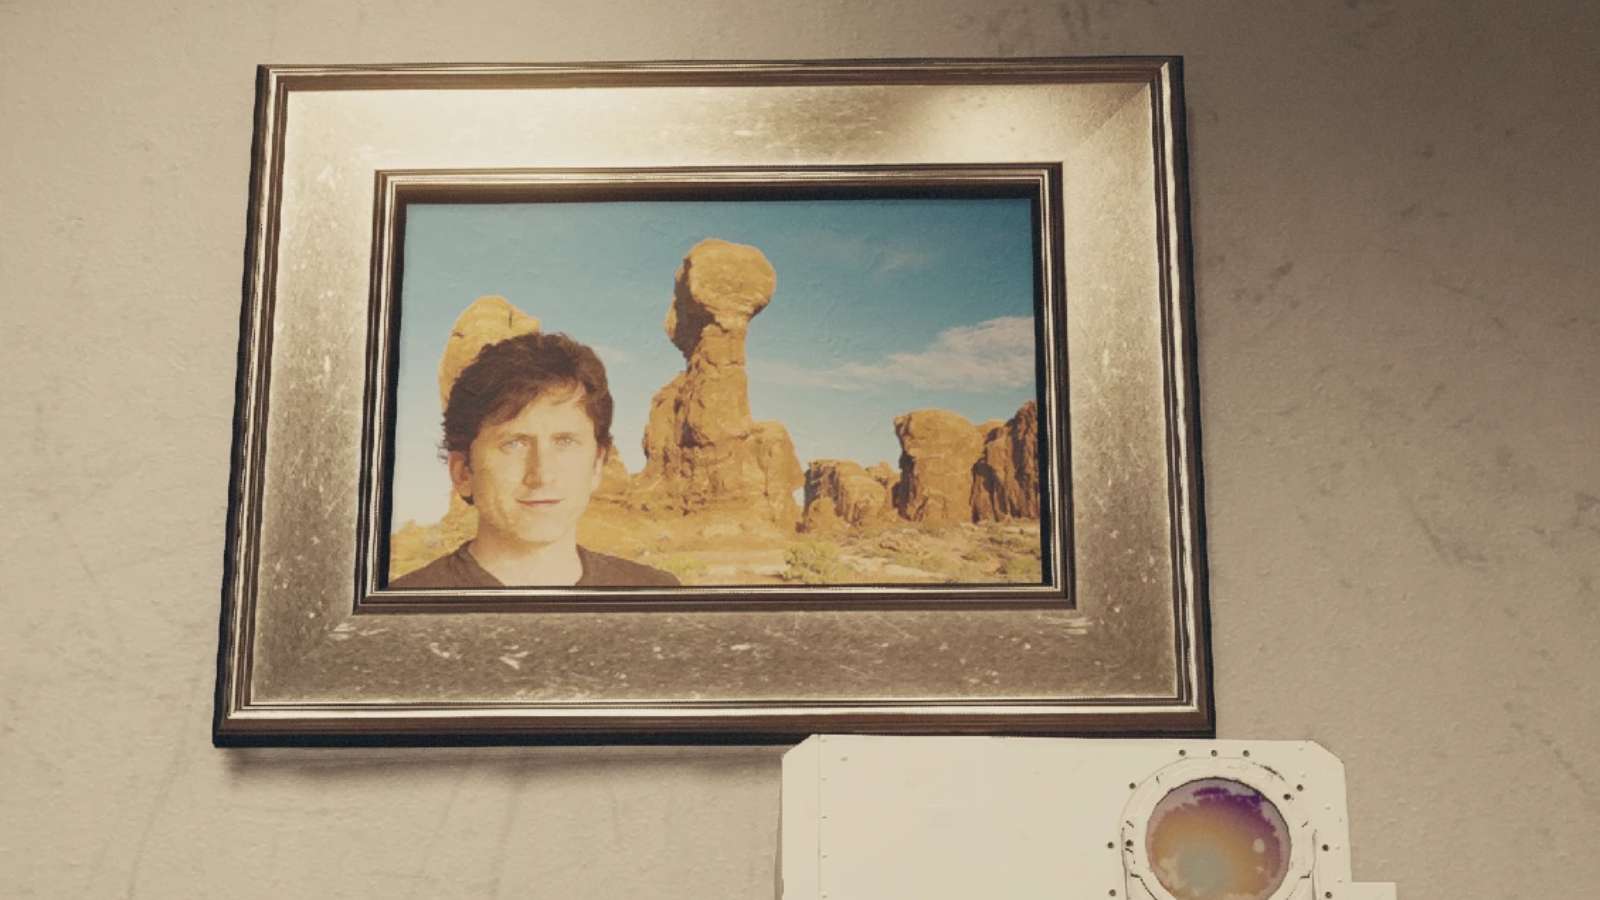 Todd Howard added to a painting in the Lodge in Starfield